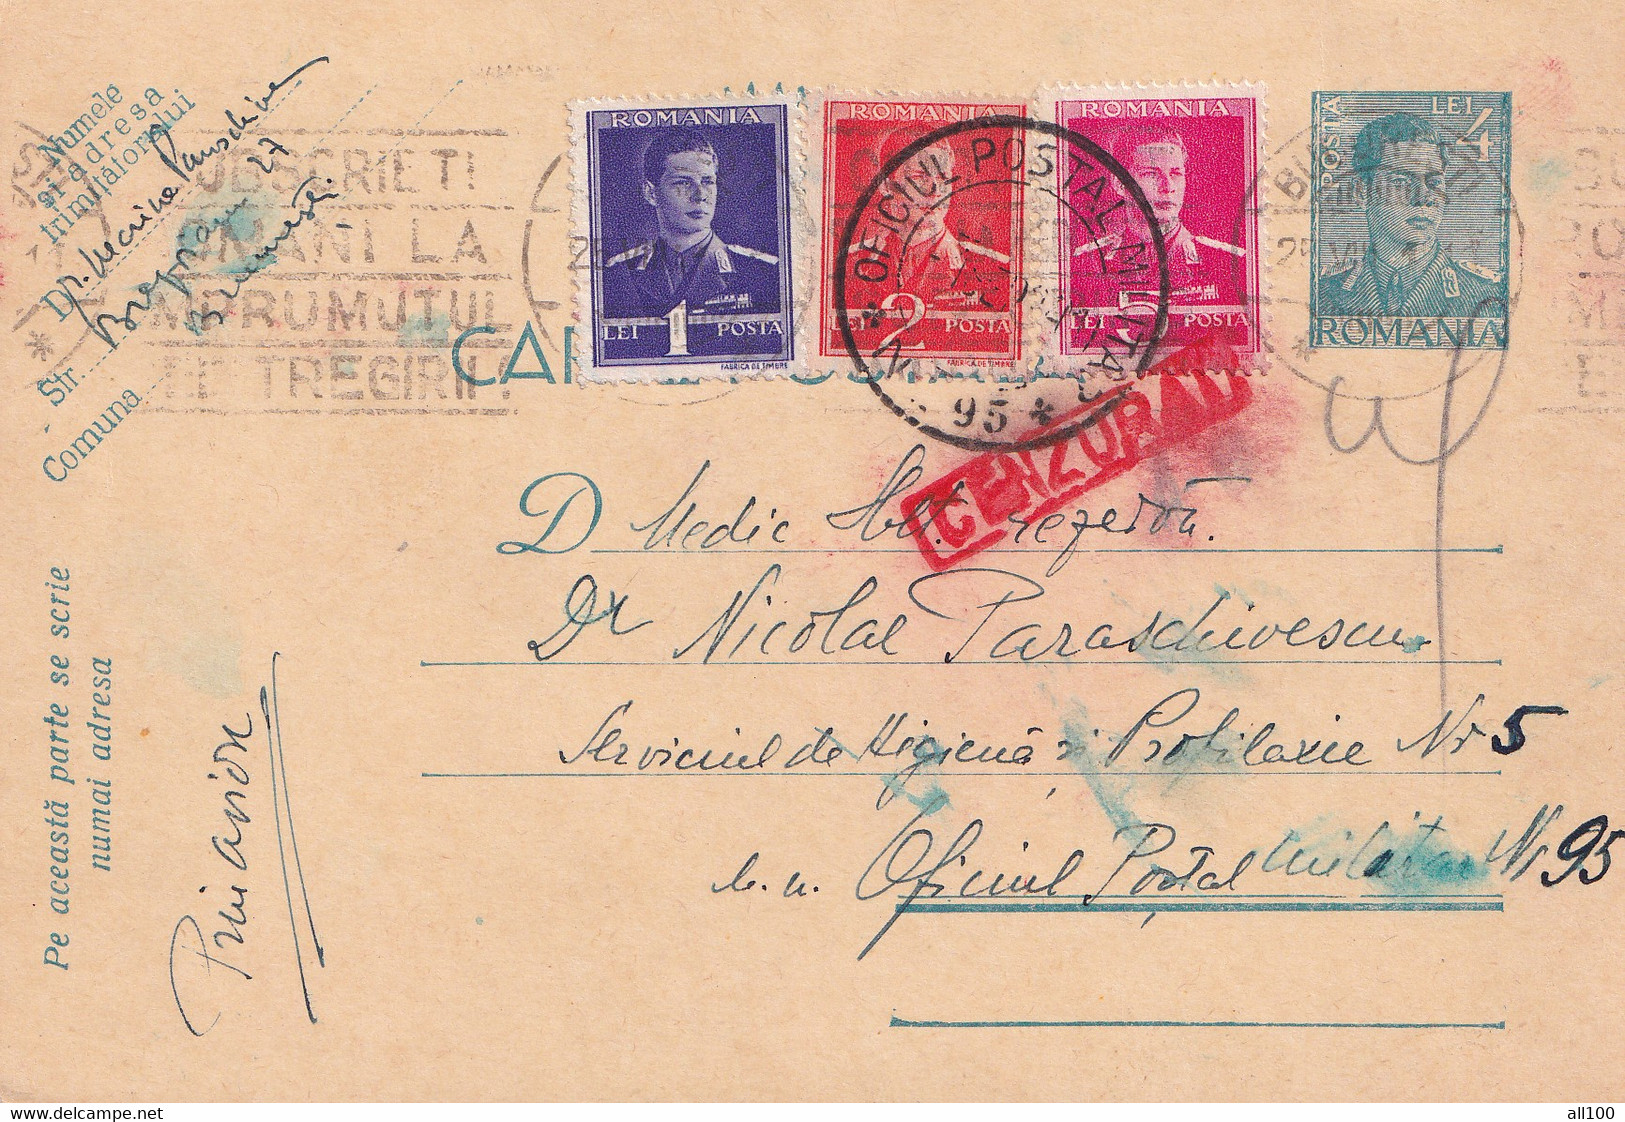 A16437 - MILITARY LETTER POSTAL STATIONERY KING MICHAEL 4 LEI CENZURAT USED 1942 OFICIUL MILITAR 95 - 2. Weltkrieg (Briefe)